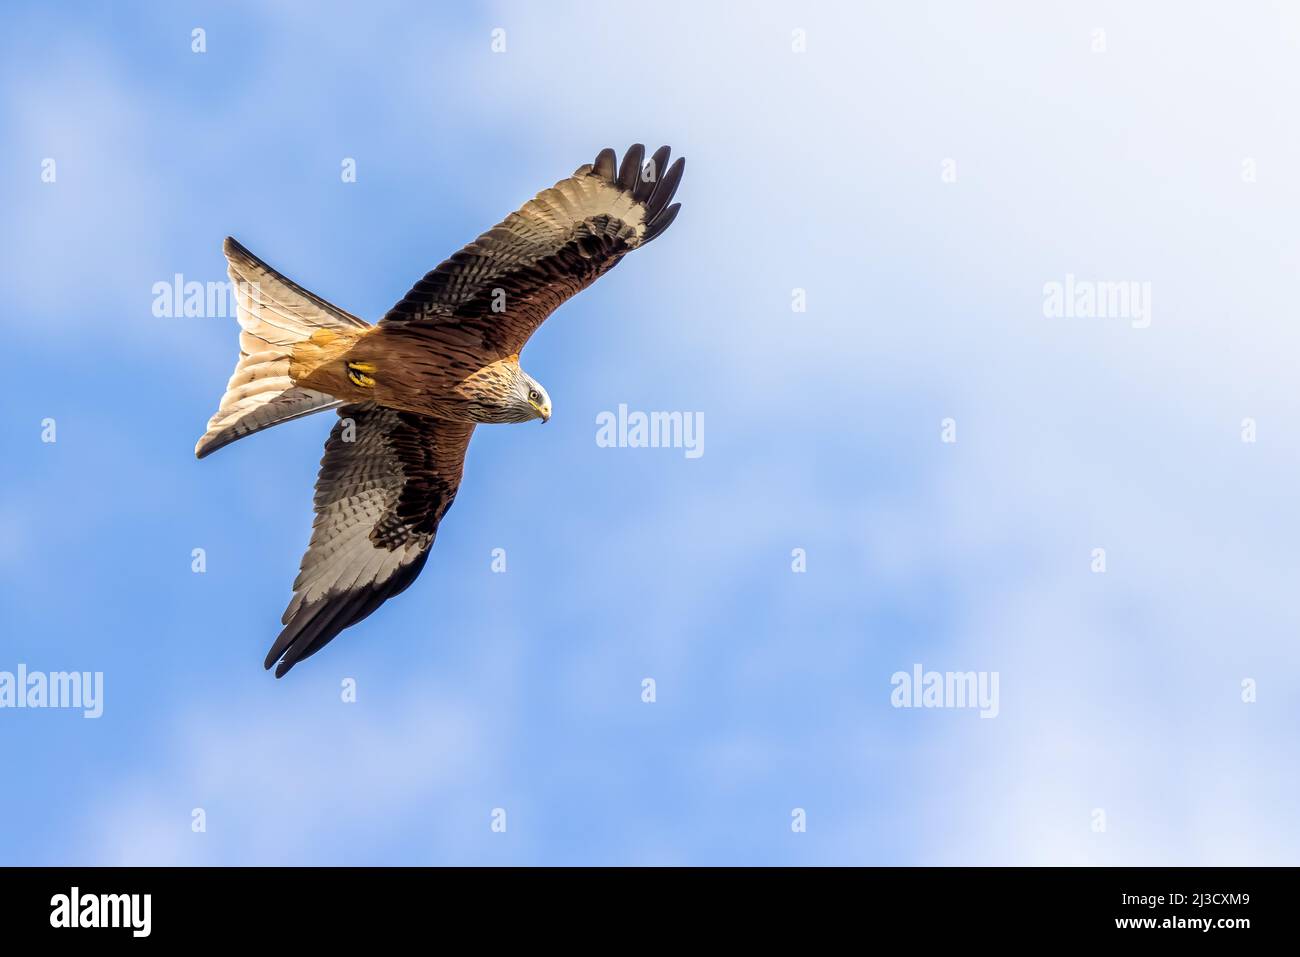 Red Kite (Milvus milvus) flying in Northamptonshire UK - Blue Sky, space for copy Stock Photo